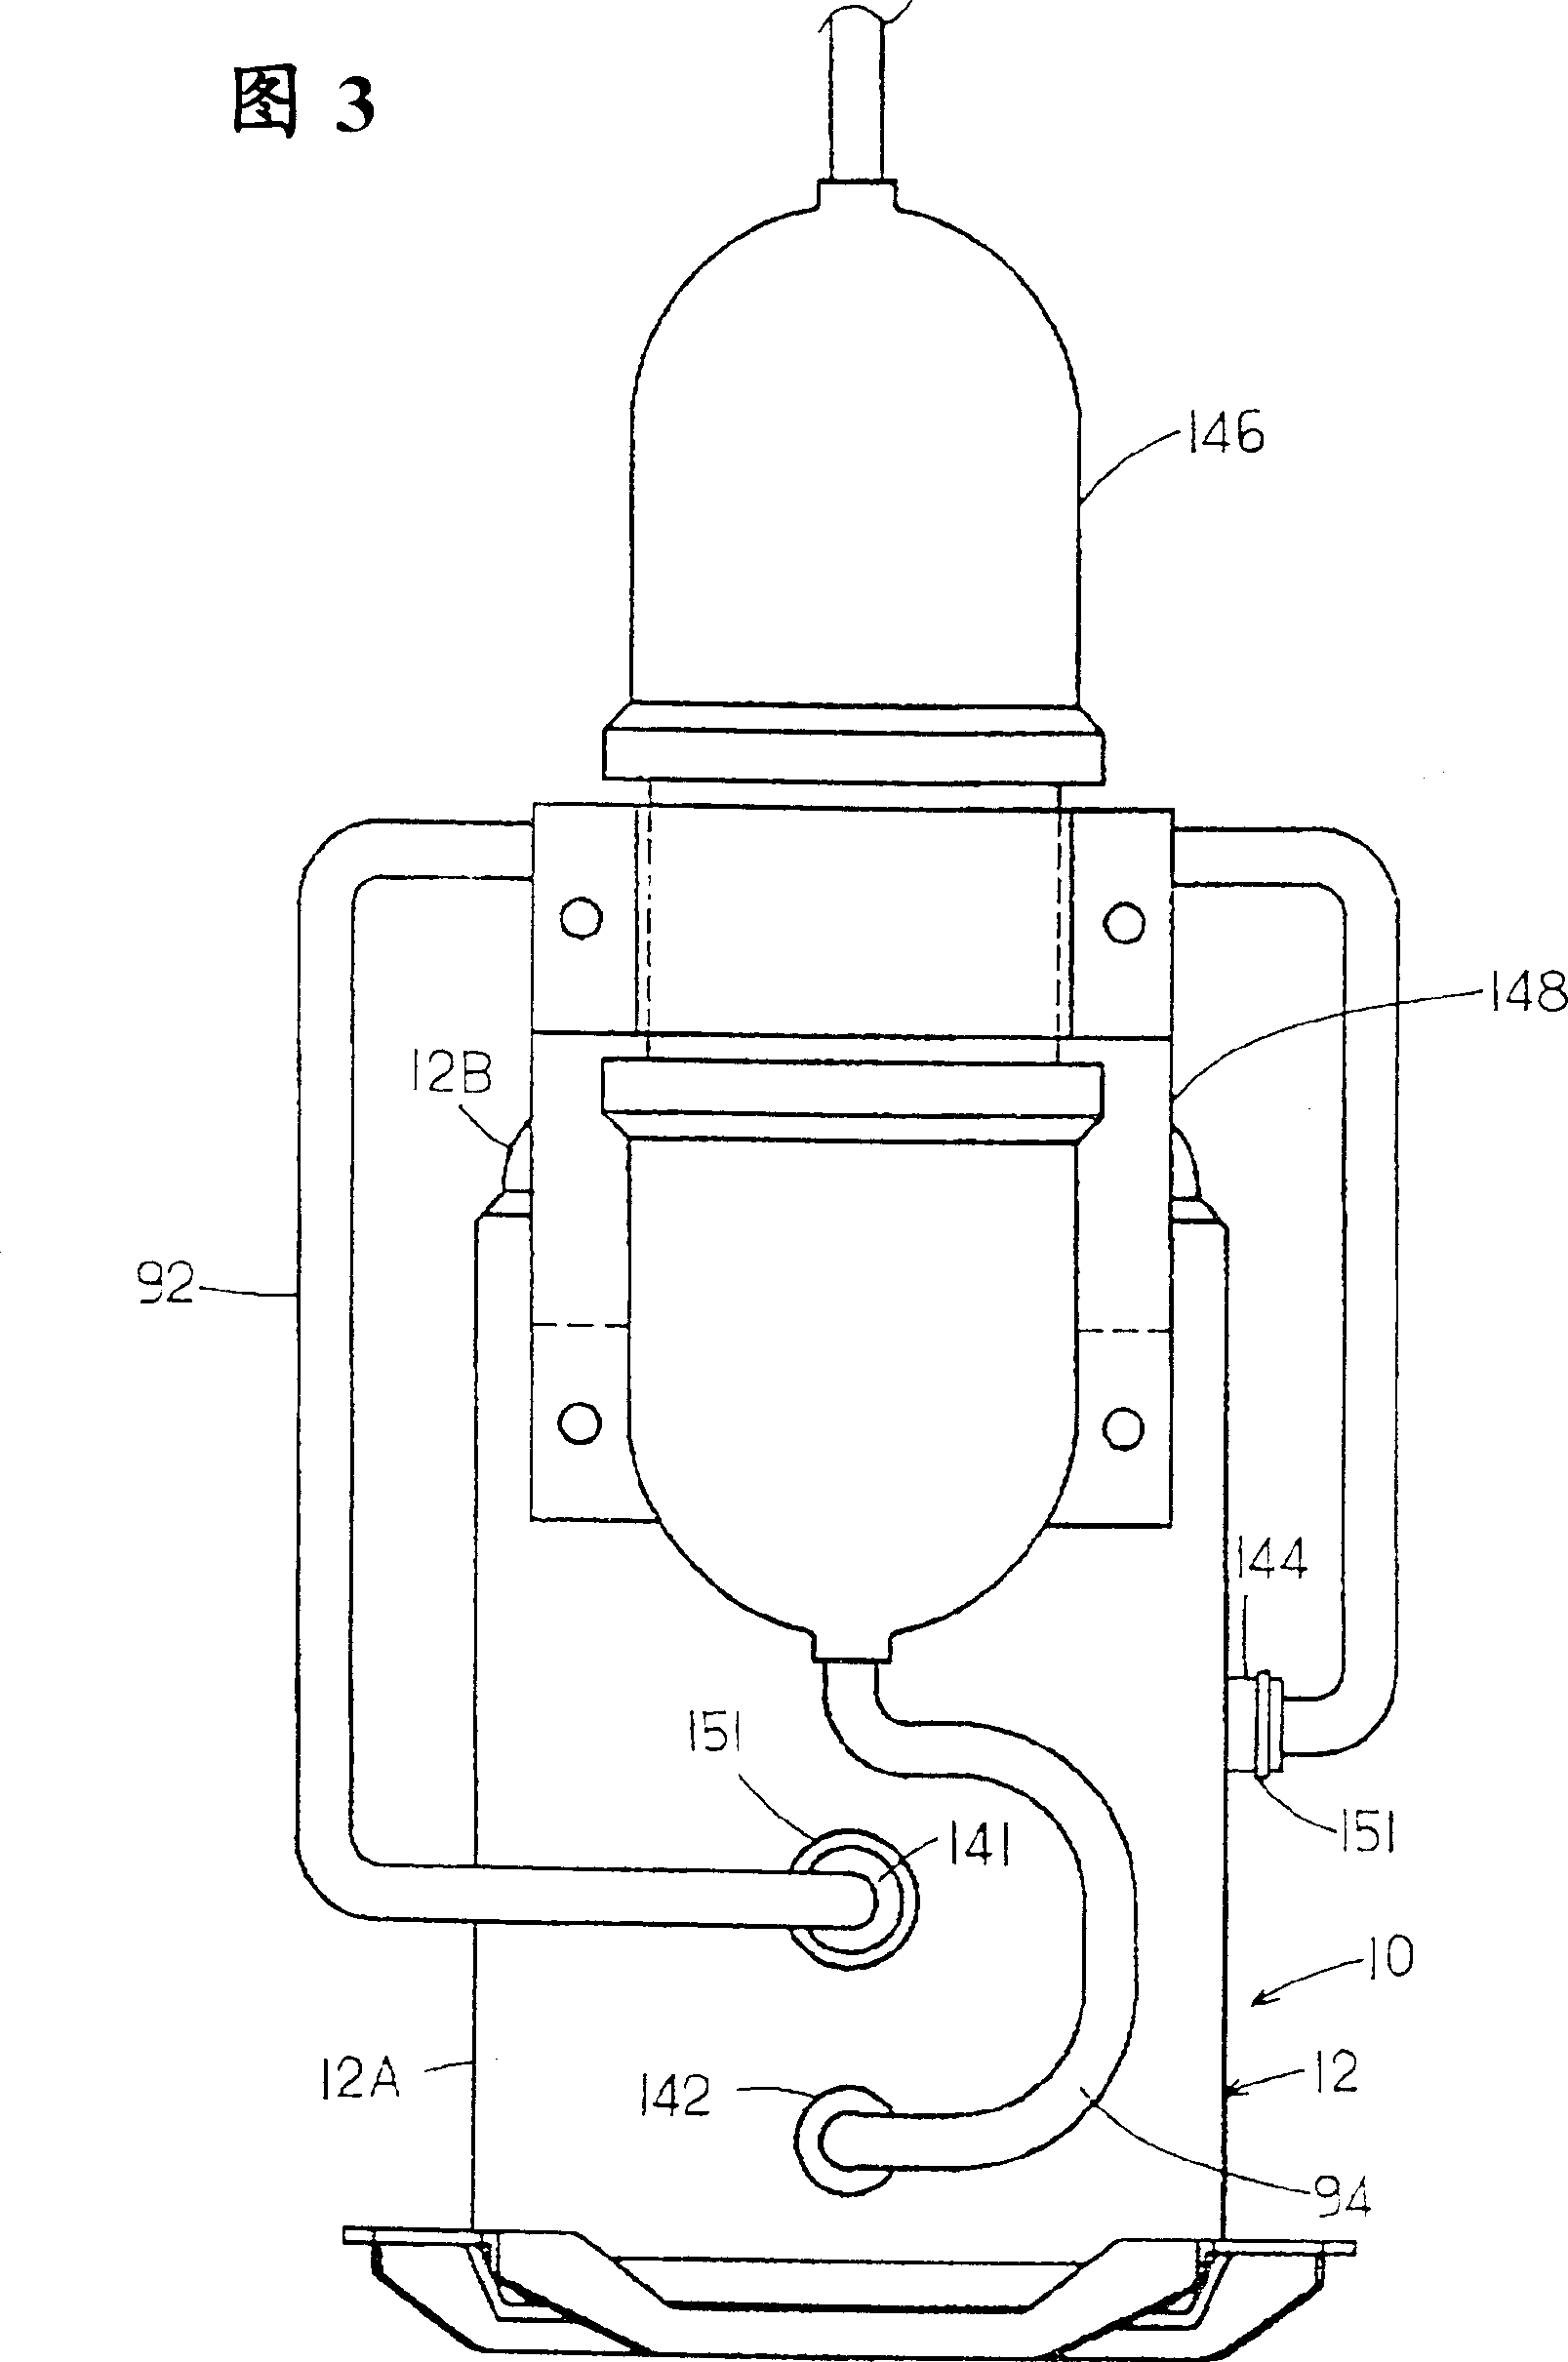 Defrosting device of refrigerant loop and rotary compressor for refrigerant loop